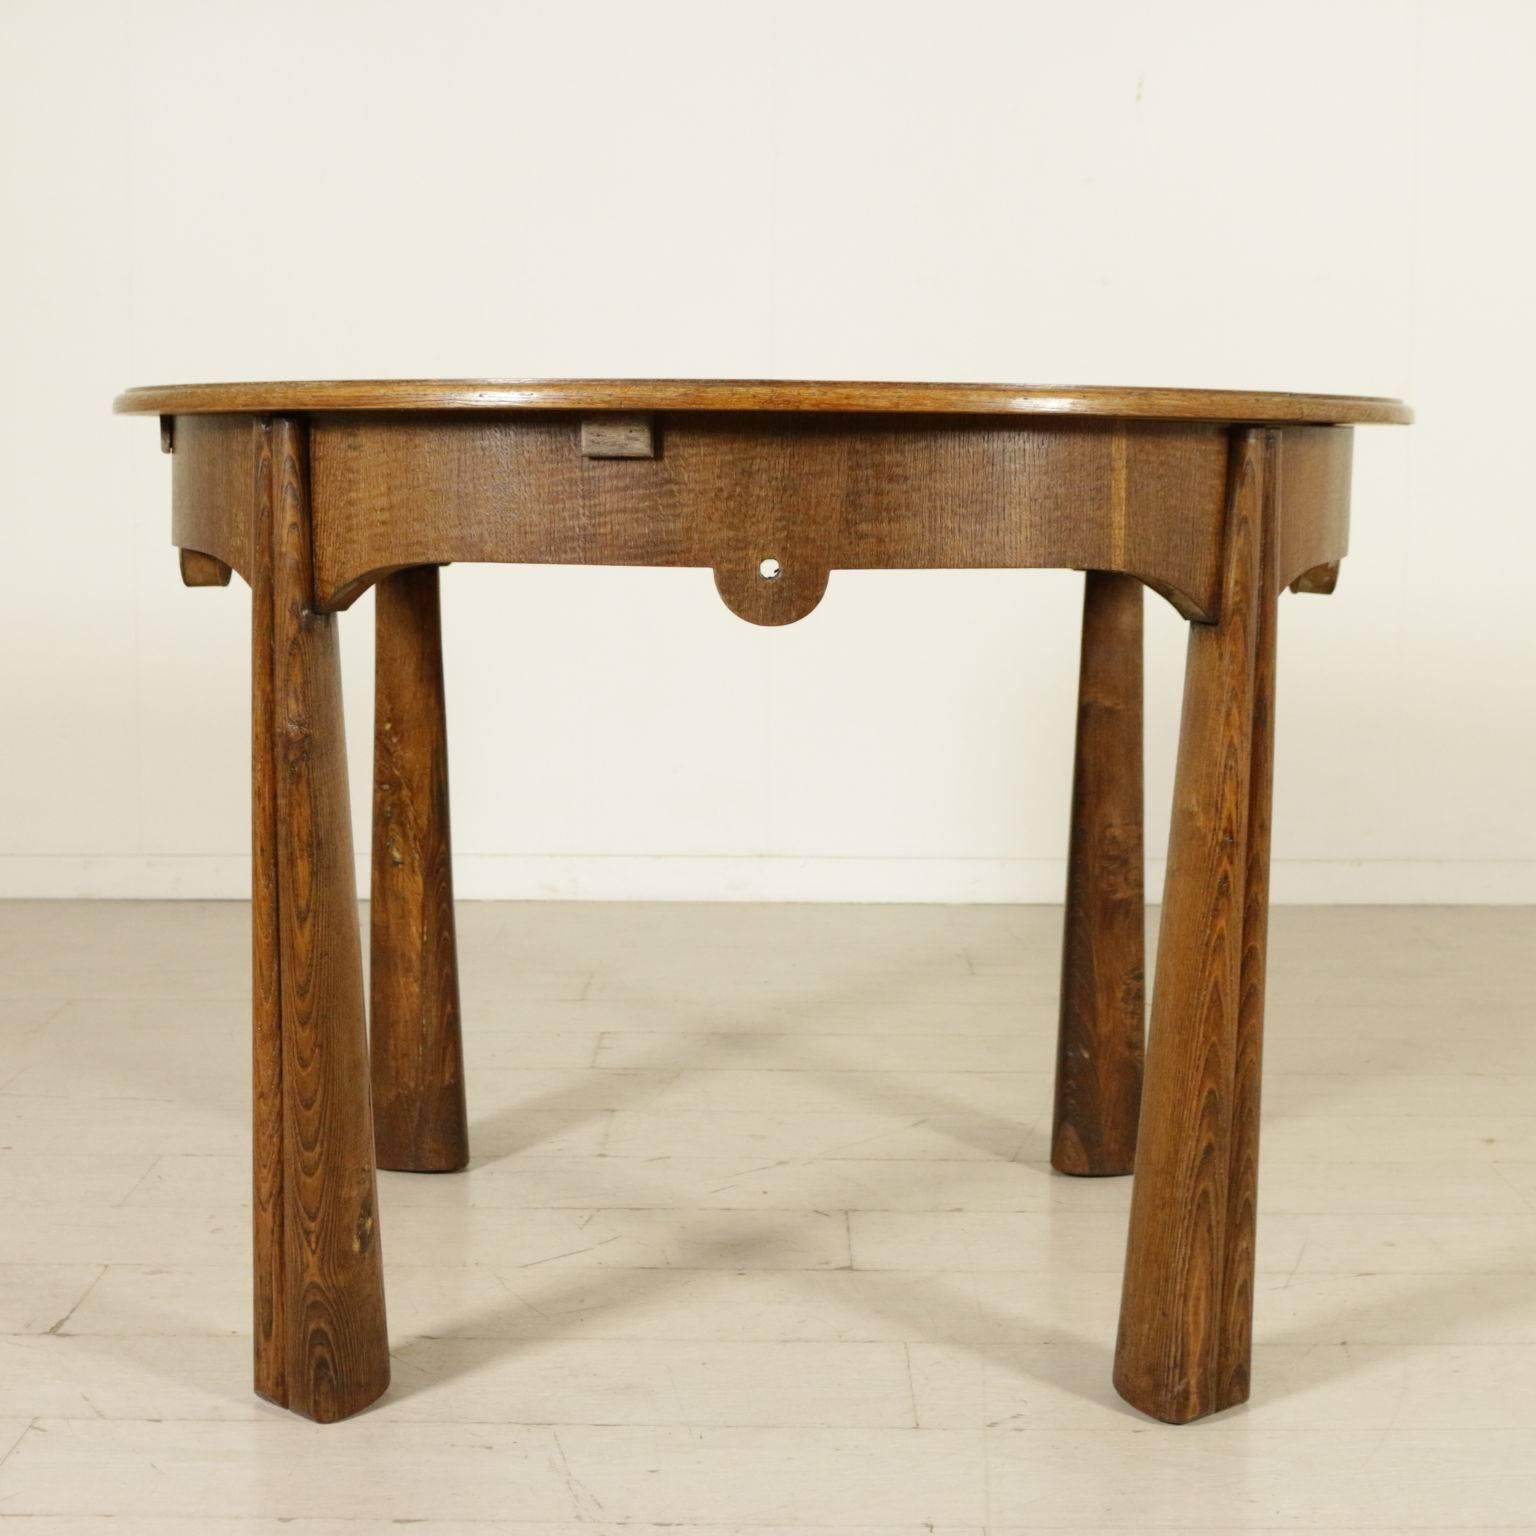 A round table, oak veneer. Manufactured in Italy, 1950s.